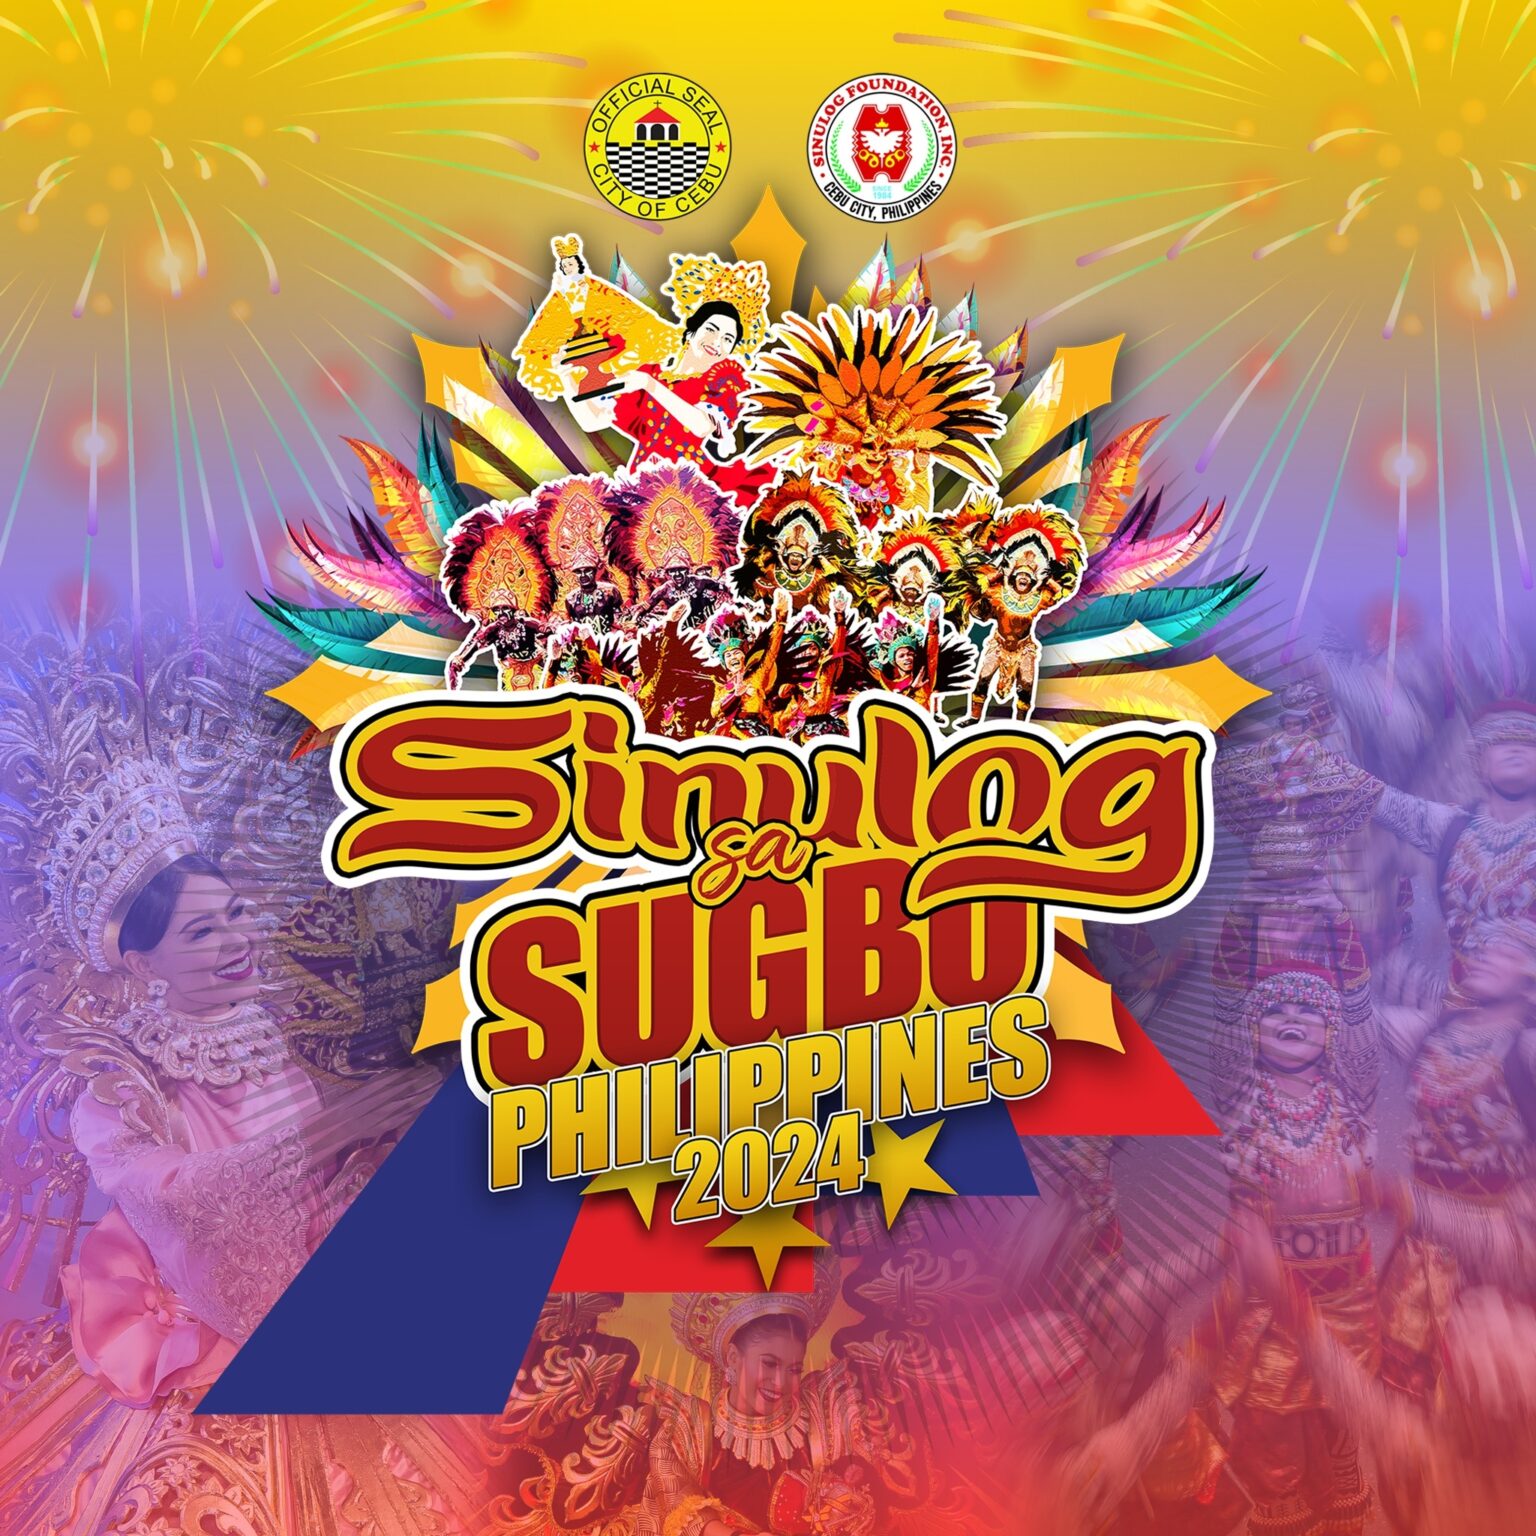 Why is it called 'Sinulog sa Sugbo Philippines 2024'?